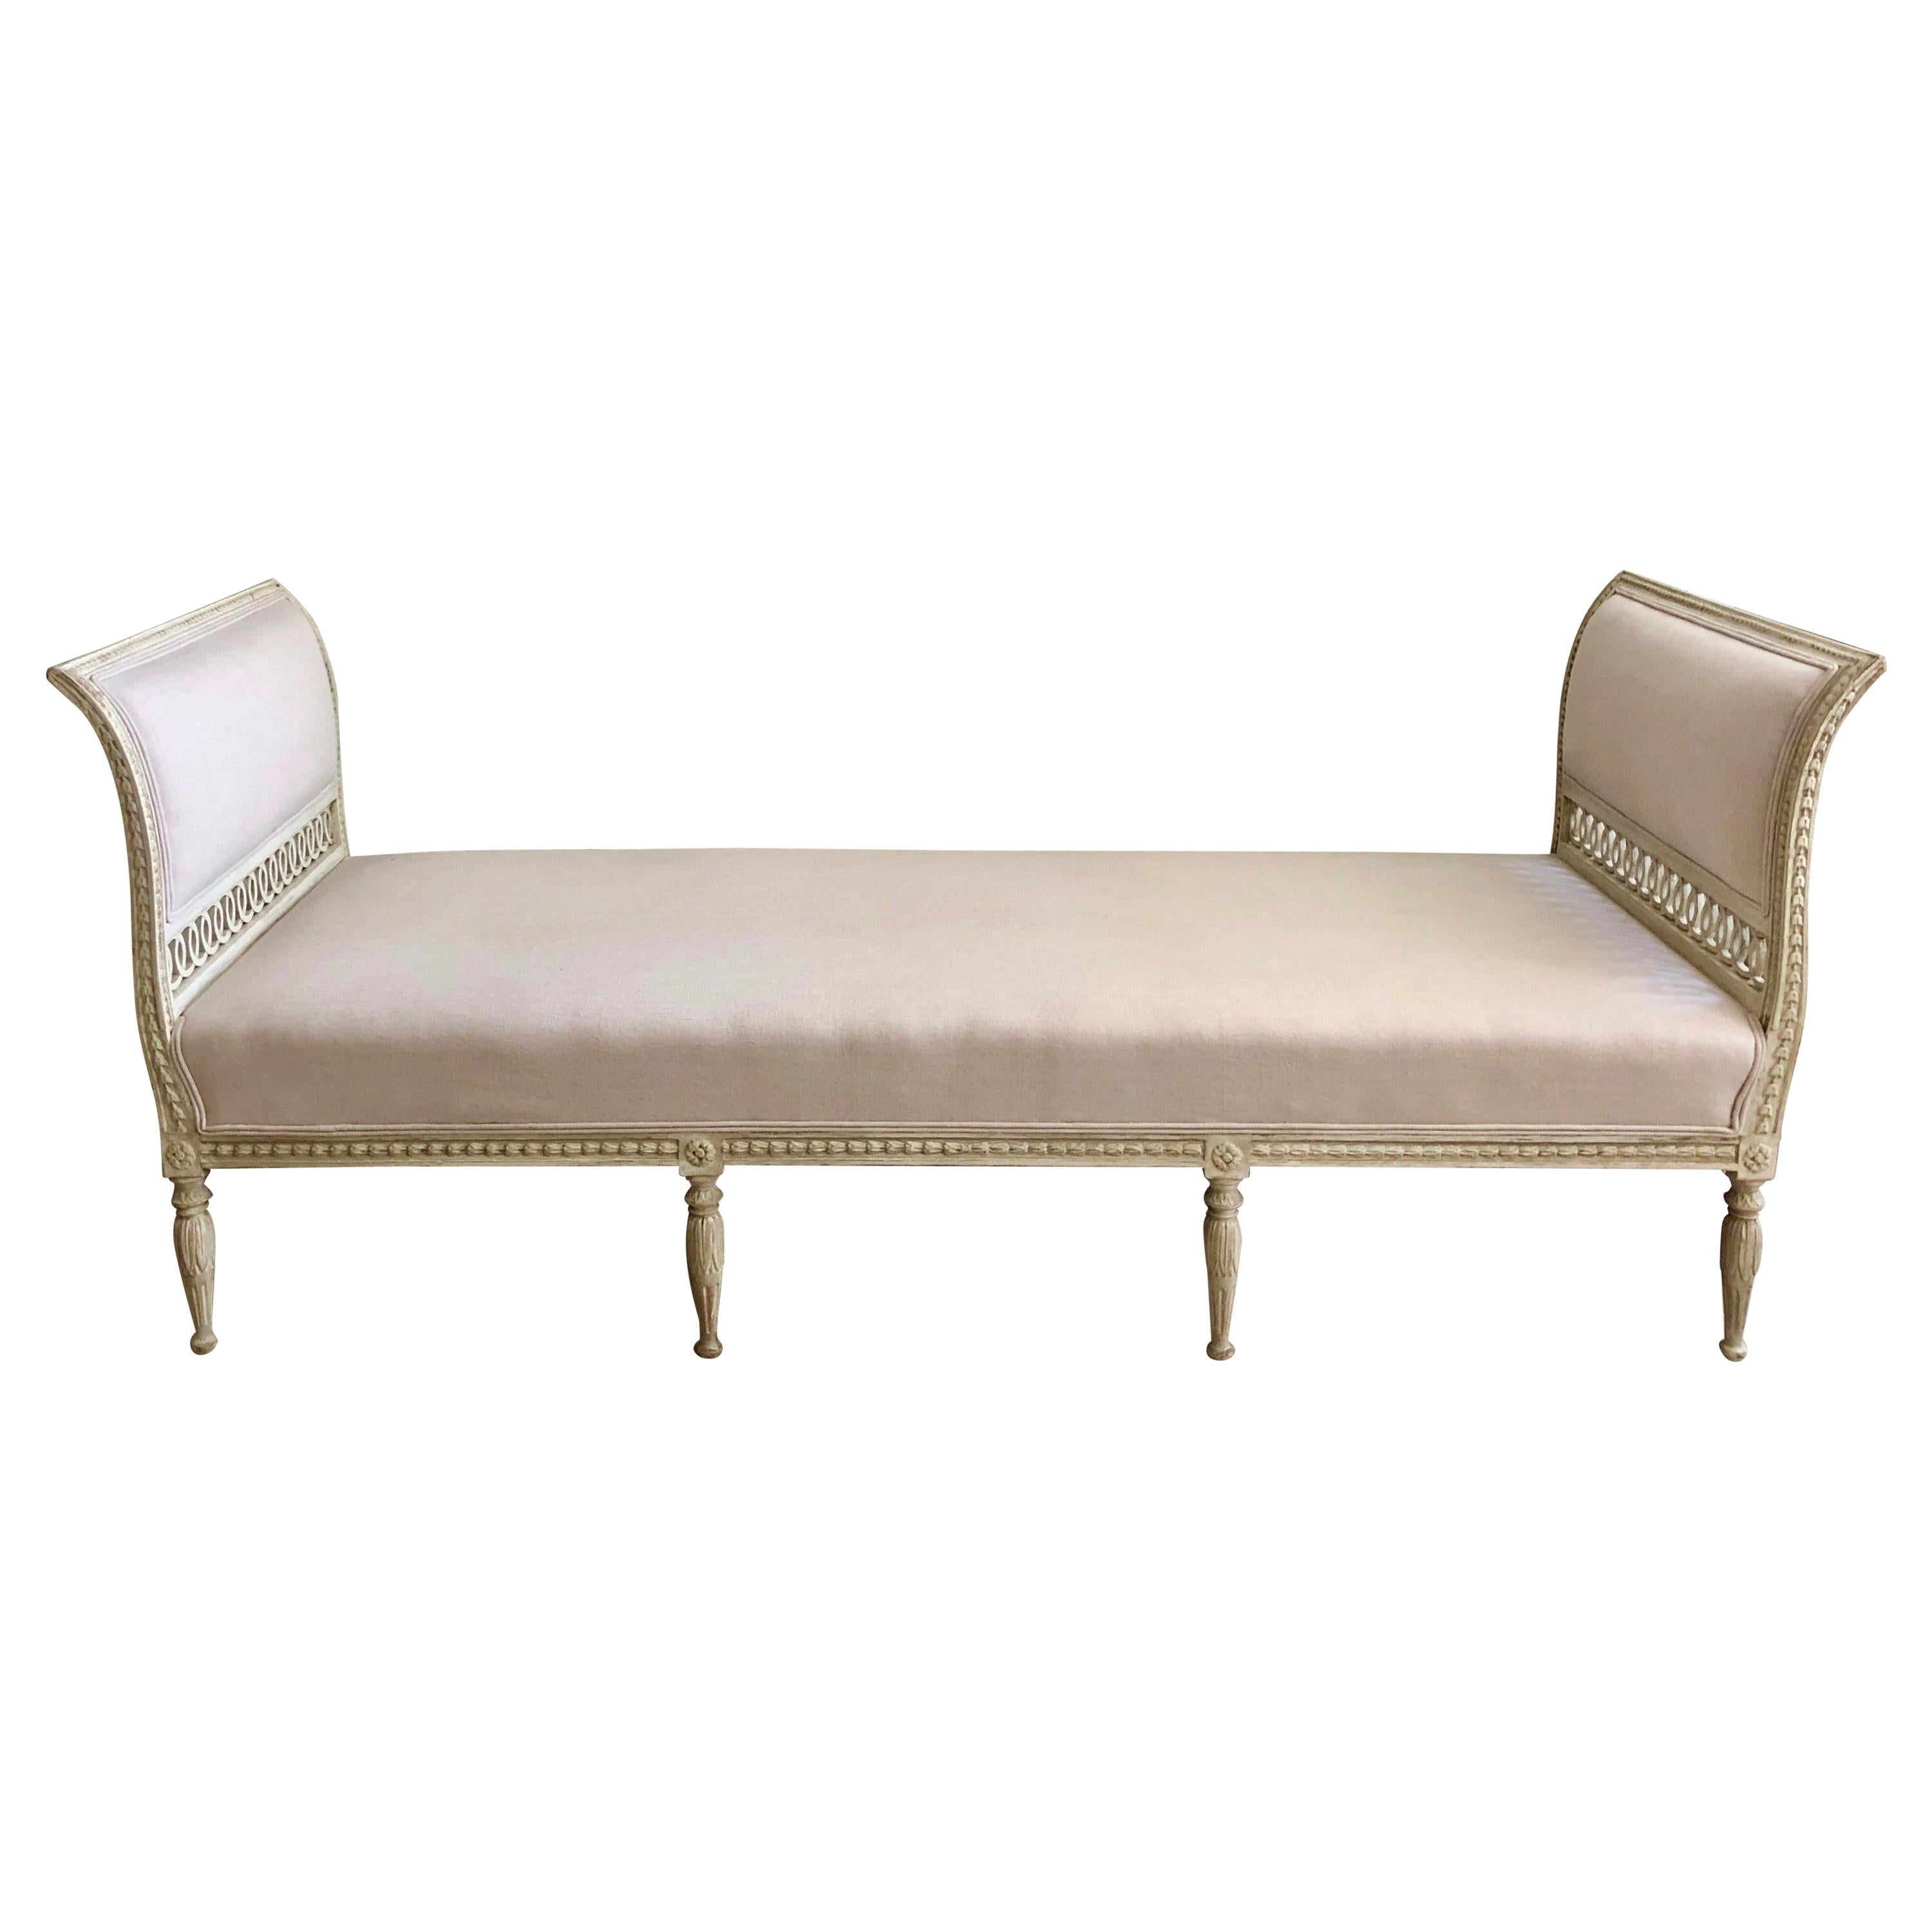 19th Century Swedish Gustavian Style Settee/Daybed